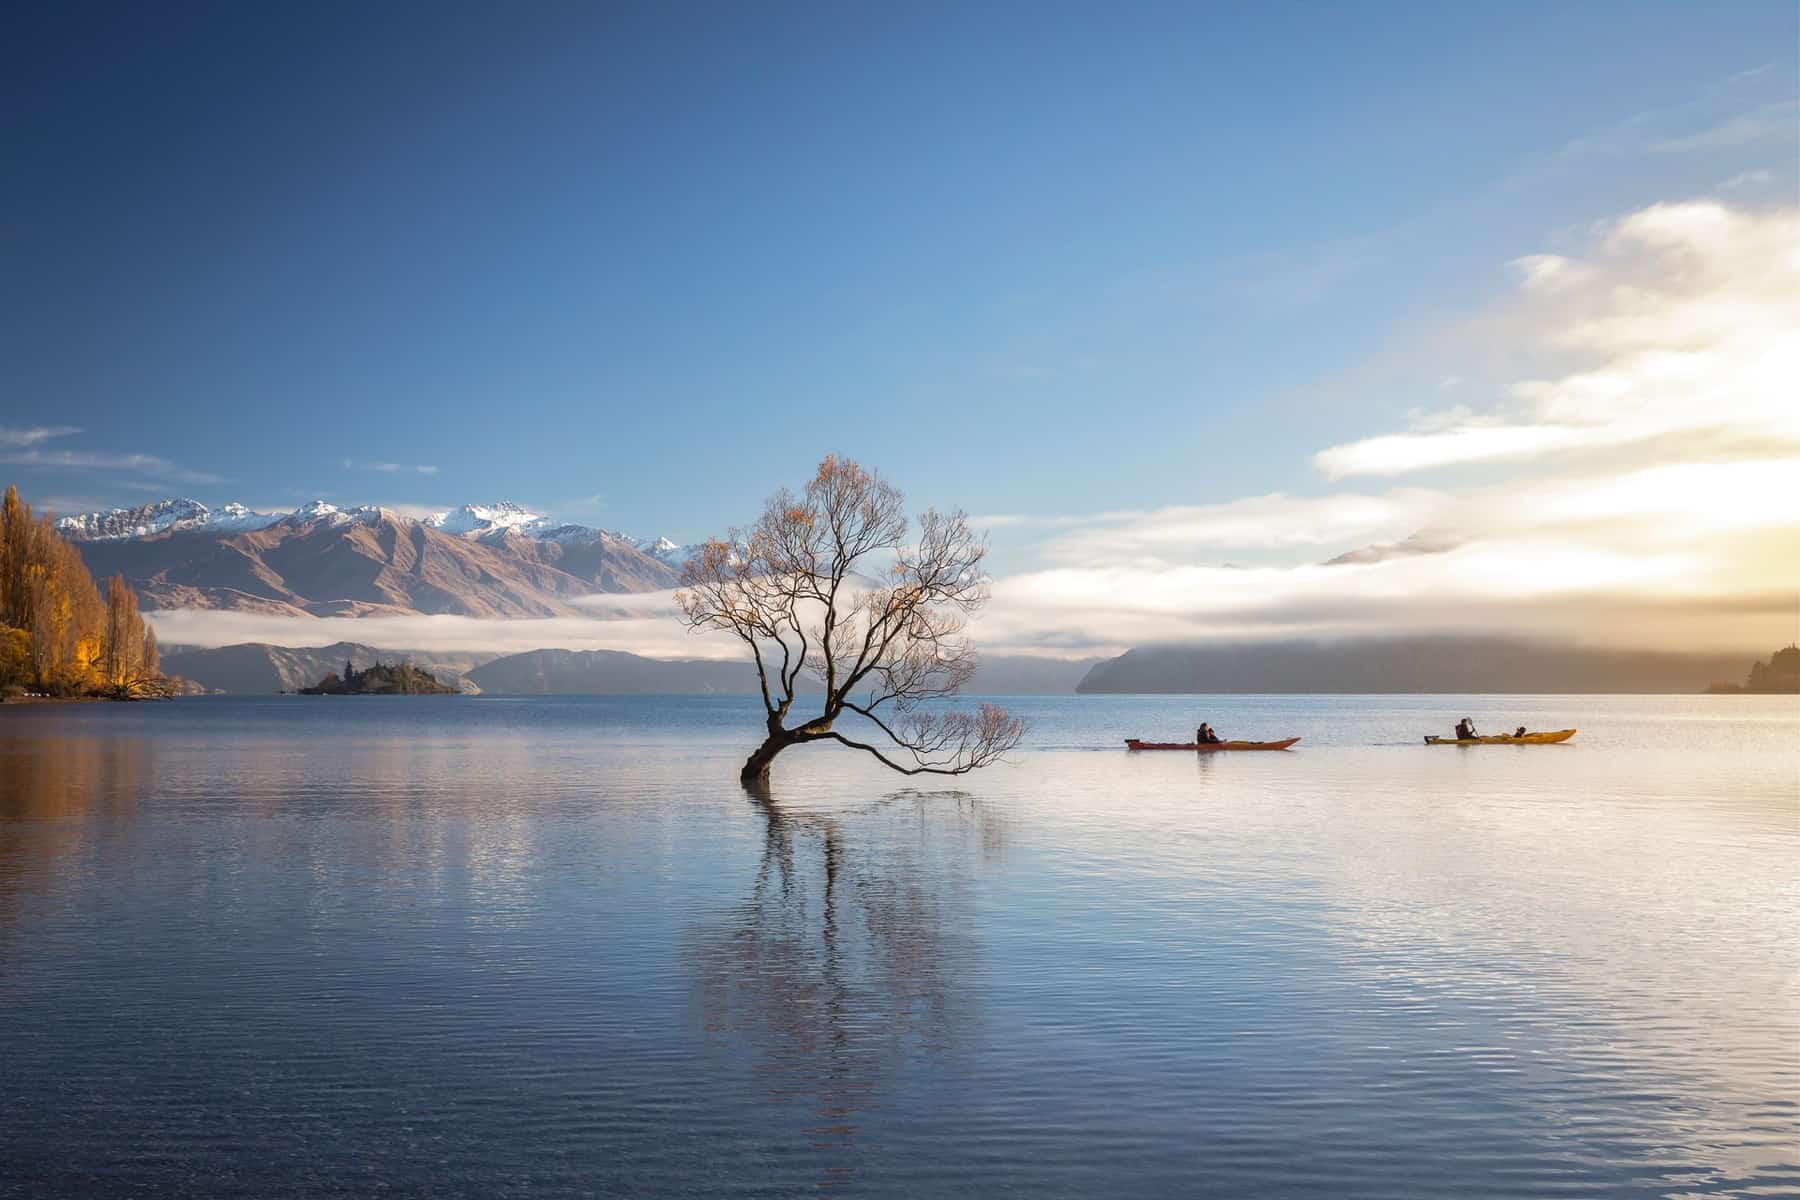 A must-see in New Zealand: famous tree in Wanaka